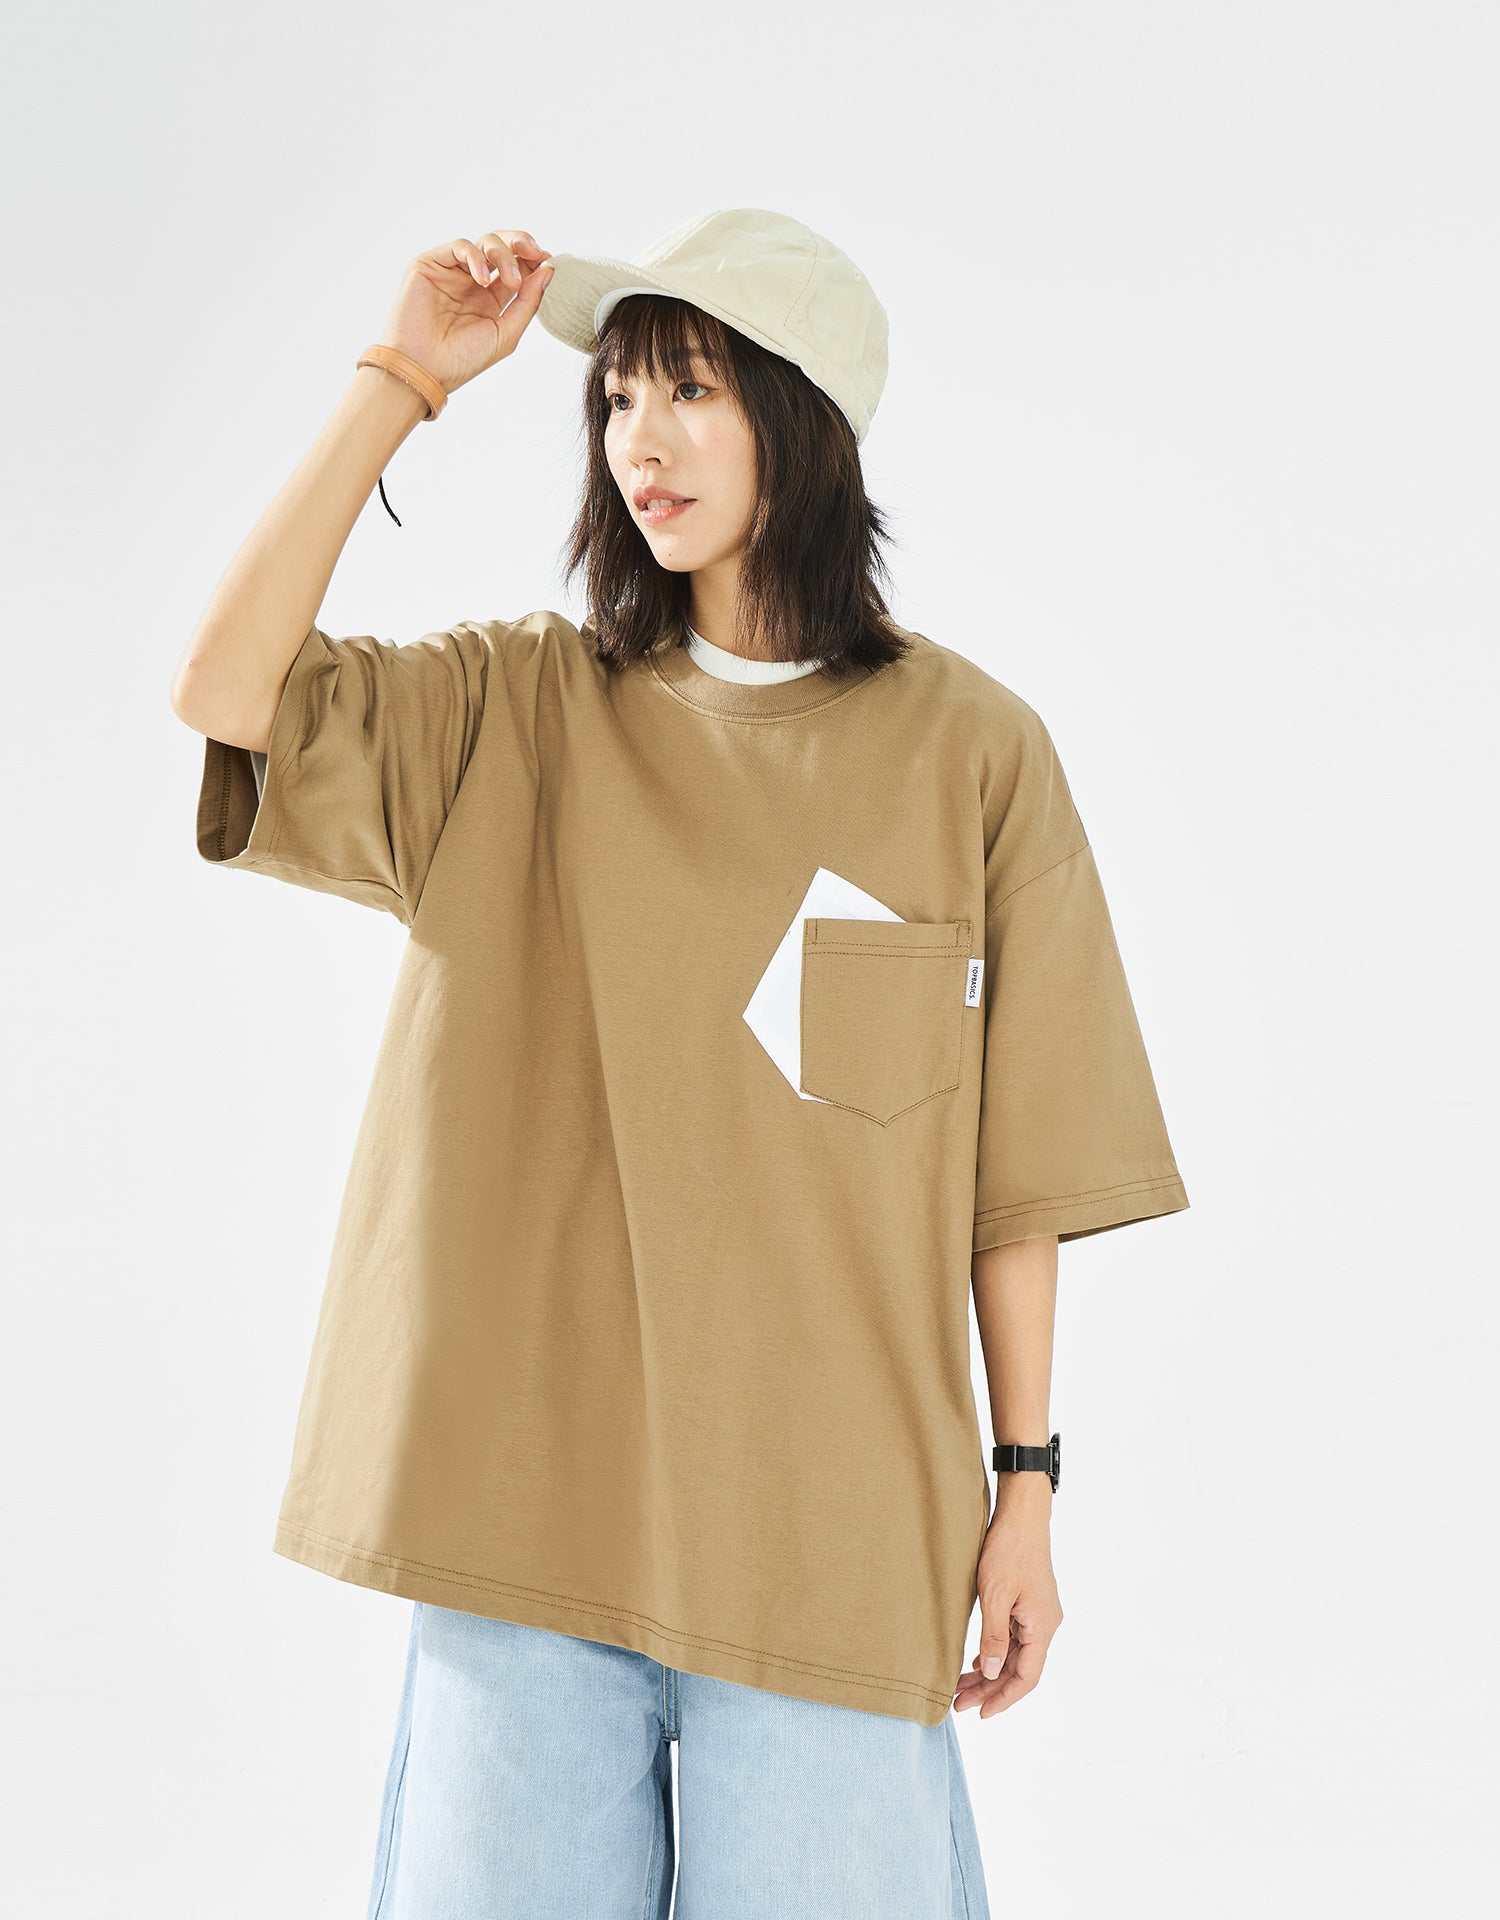 TopBasics Two Patch Pockets T-Shirt